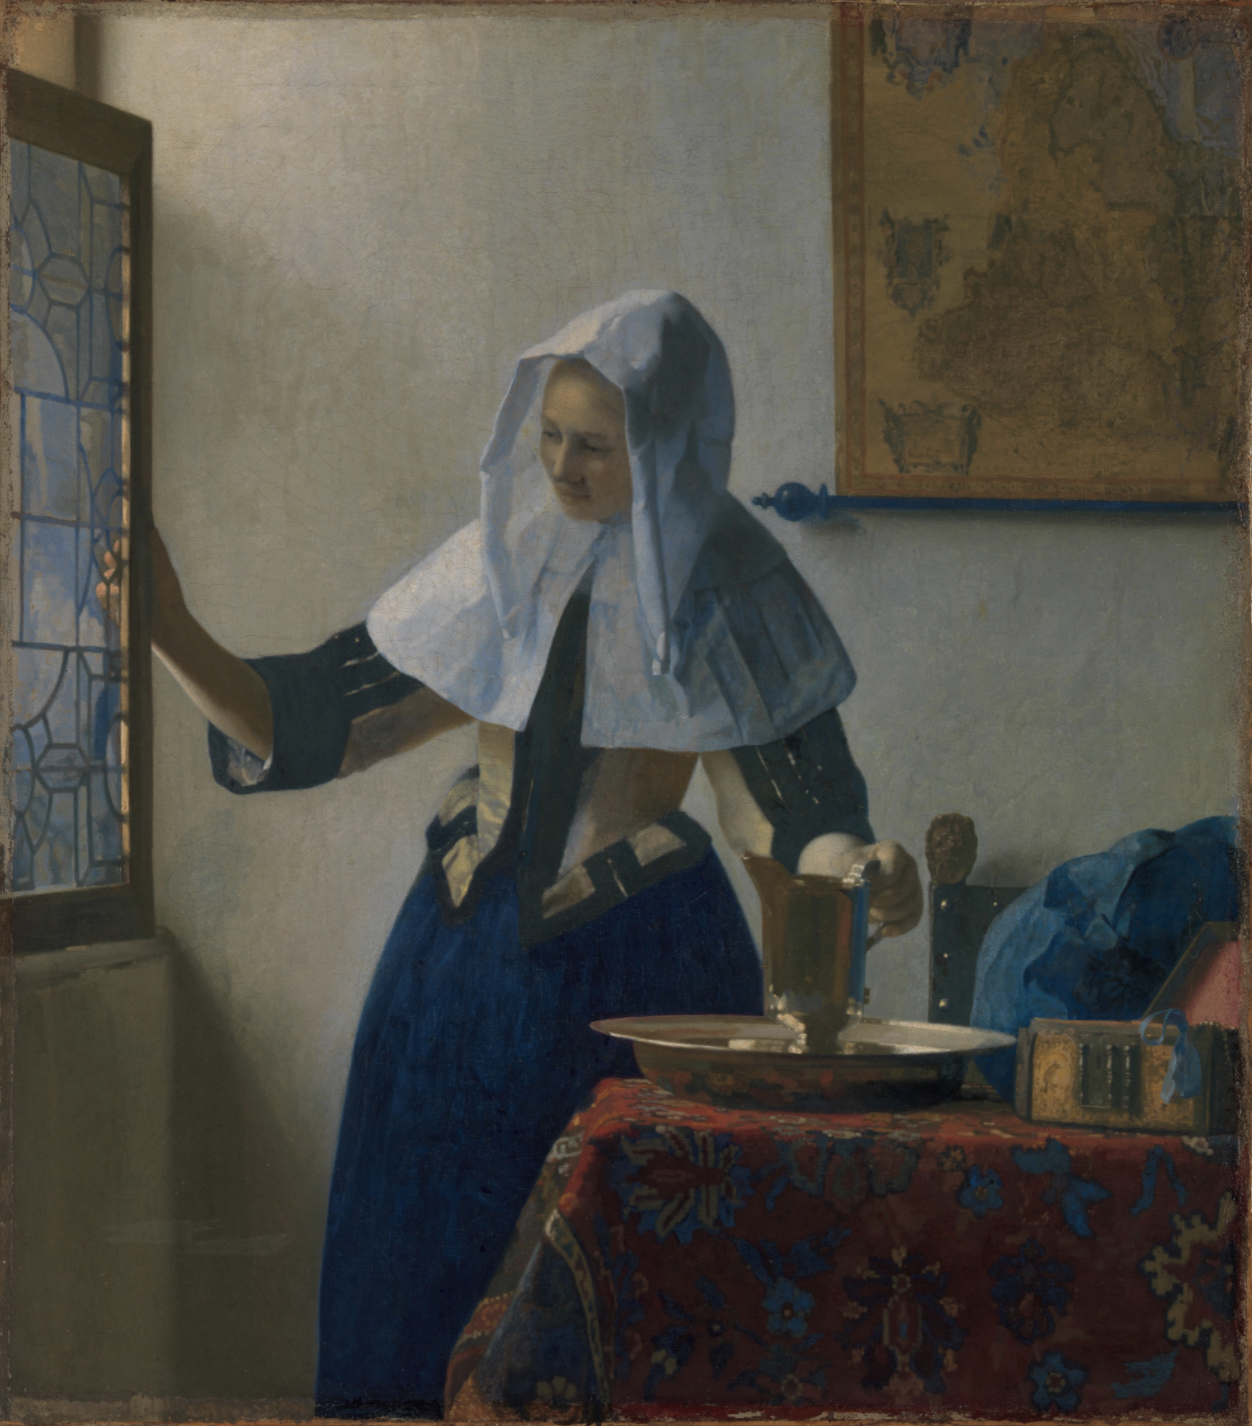 A full-color oil painting of a 17th-century domestic interior depicting a young woman standing in a room lost in thought. There is an open window to her left, and to her right a table, on which sits a plate and a water pitcher. The room is bathed in diffuse natural light. The woman, who wears a full-length blue dress and white headdress, rests one hand on the open window sash to her left, and one hand on the handle of the water pitcher to her right. The scene presents a poignant moment where time appears to have stopped.